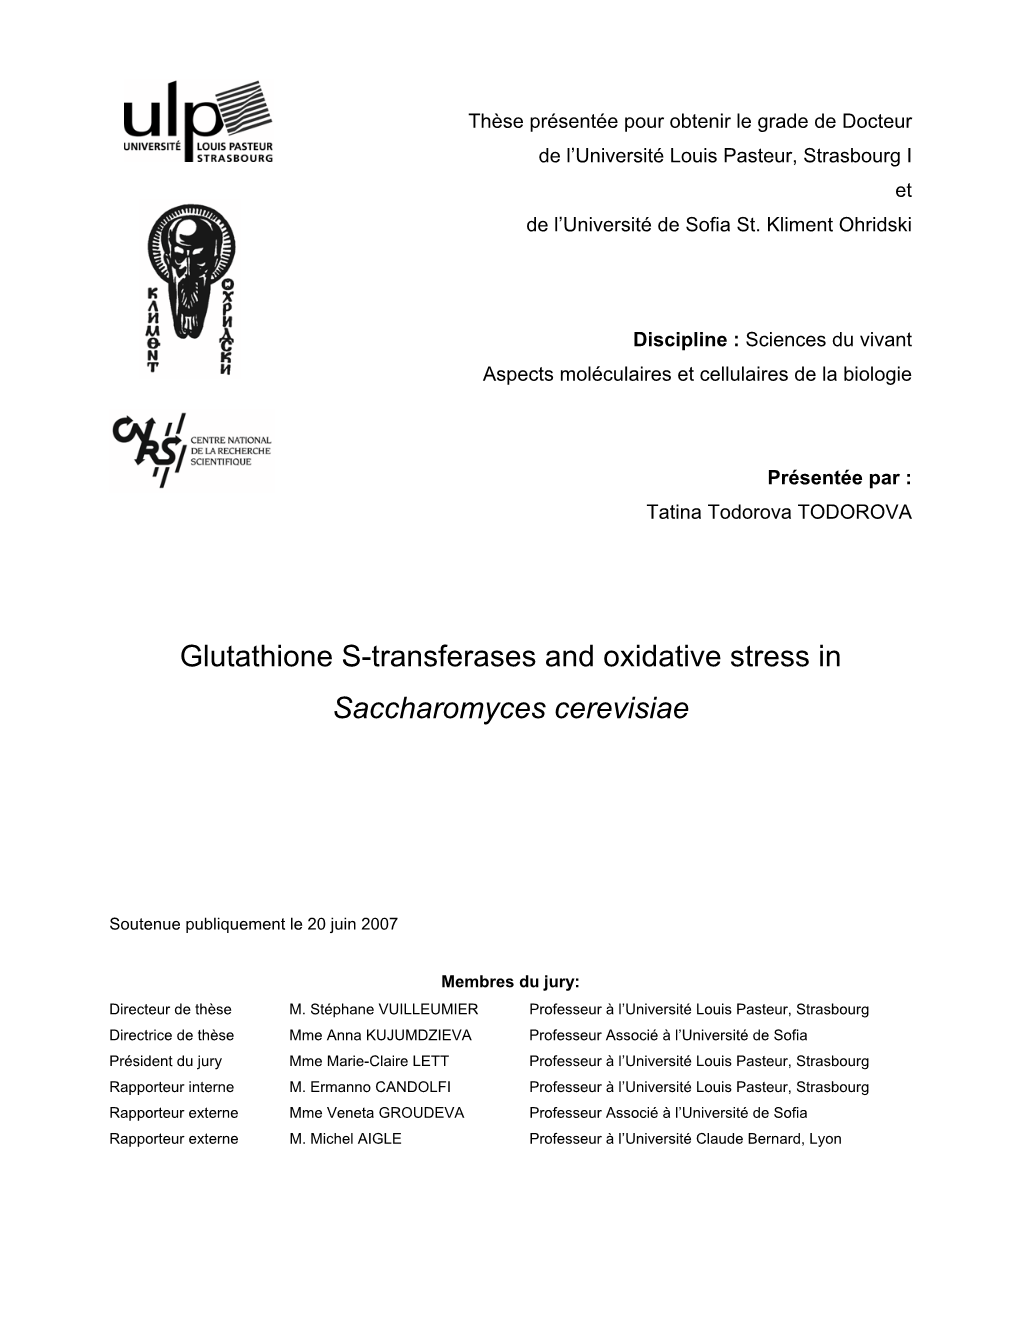 Glutathione S-Transferases and Oxidative Stress in Saccharomyces Cerevisiae